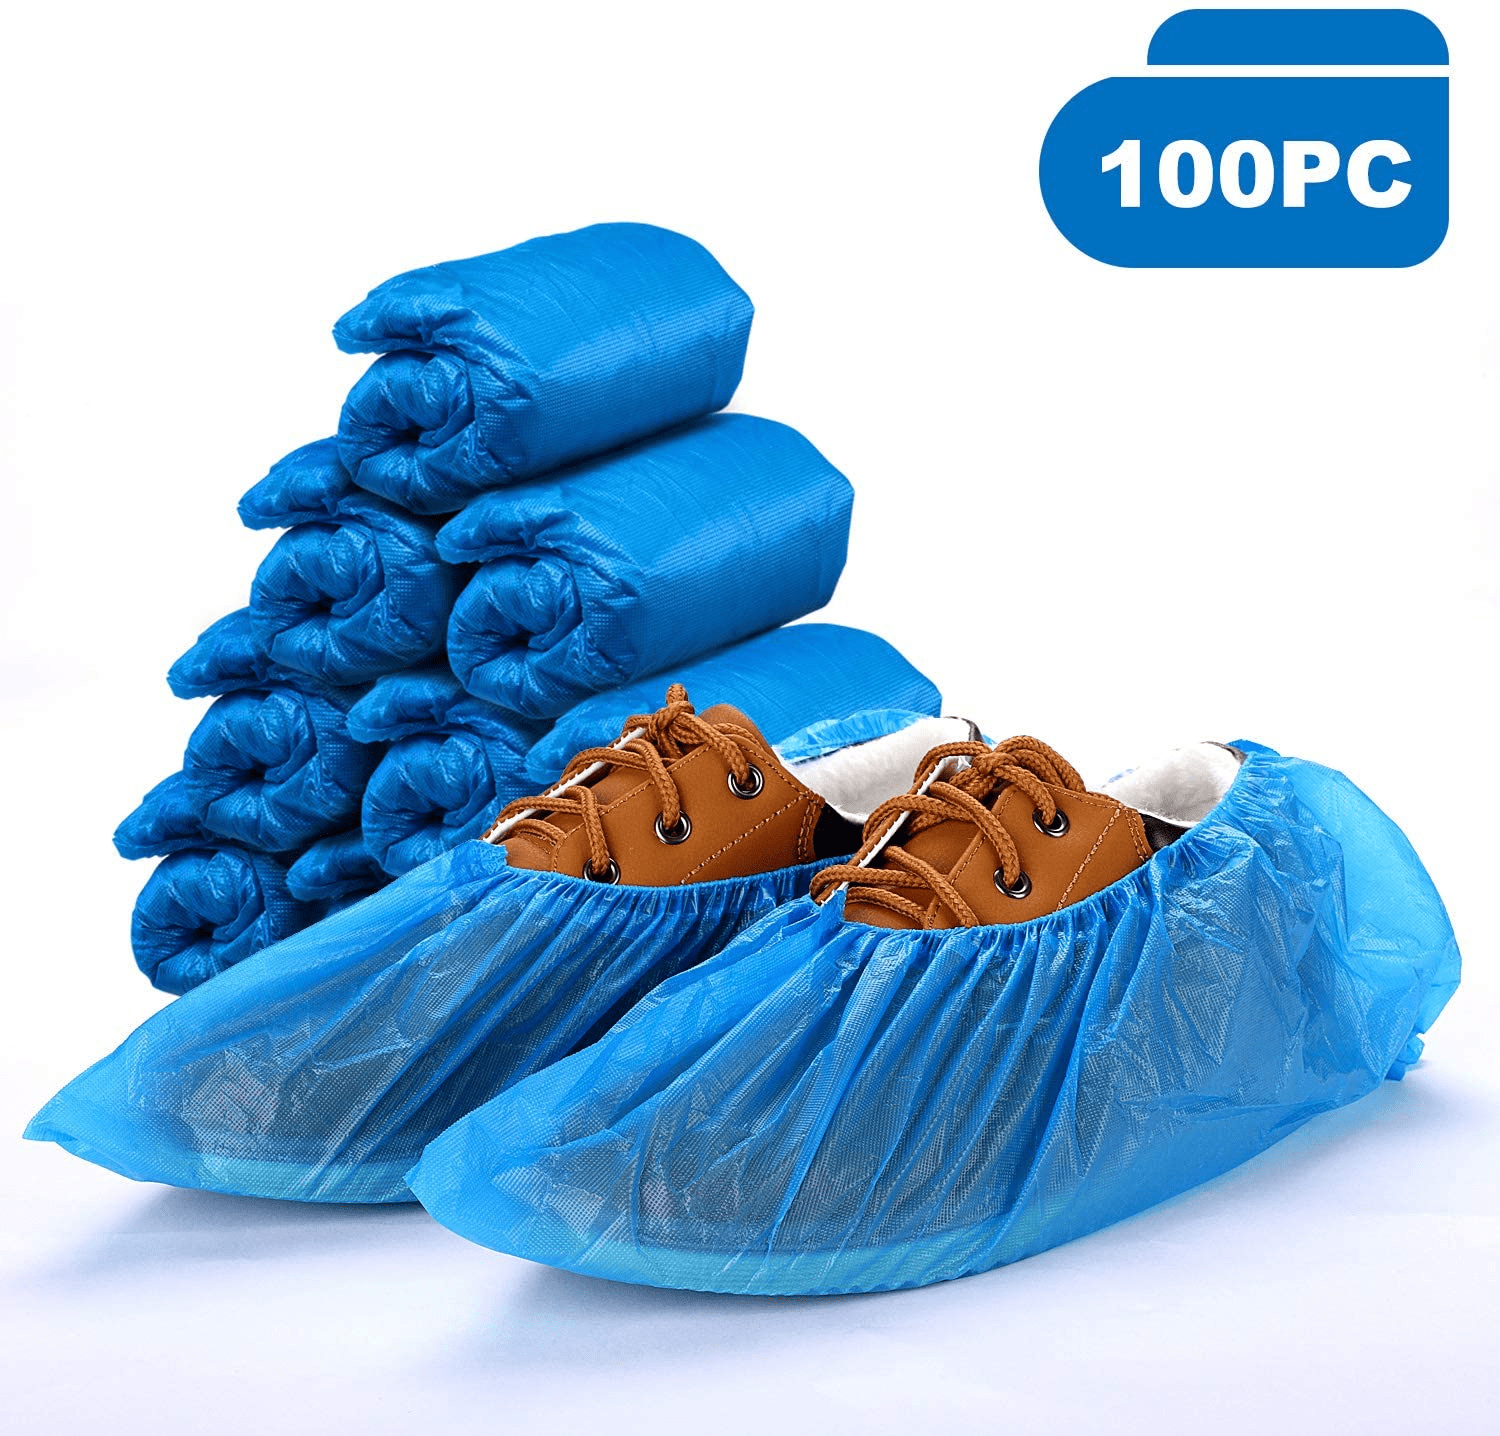 100 Pcs/50 Pairs Disposable Boots Covers Plastic Long Shoes Covers Waterproof Ra 